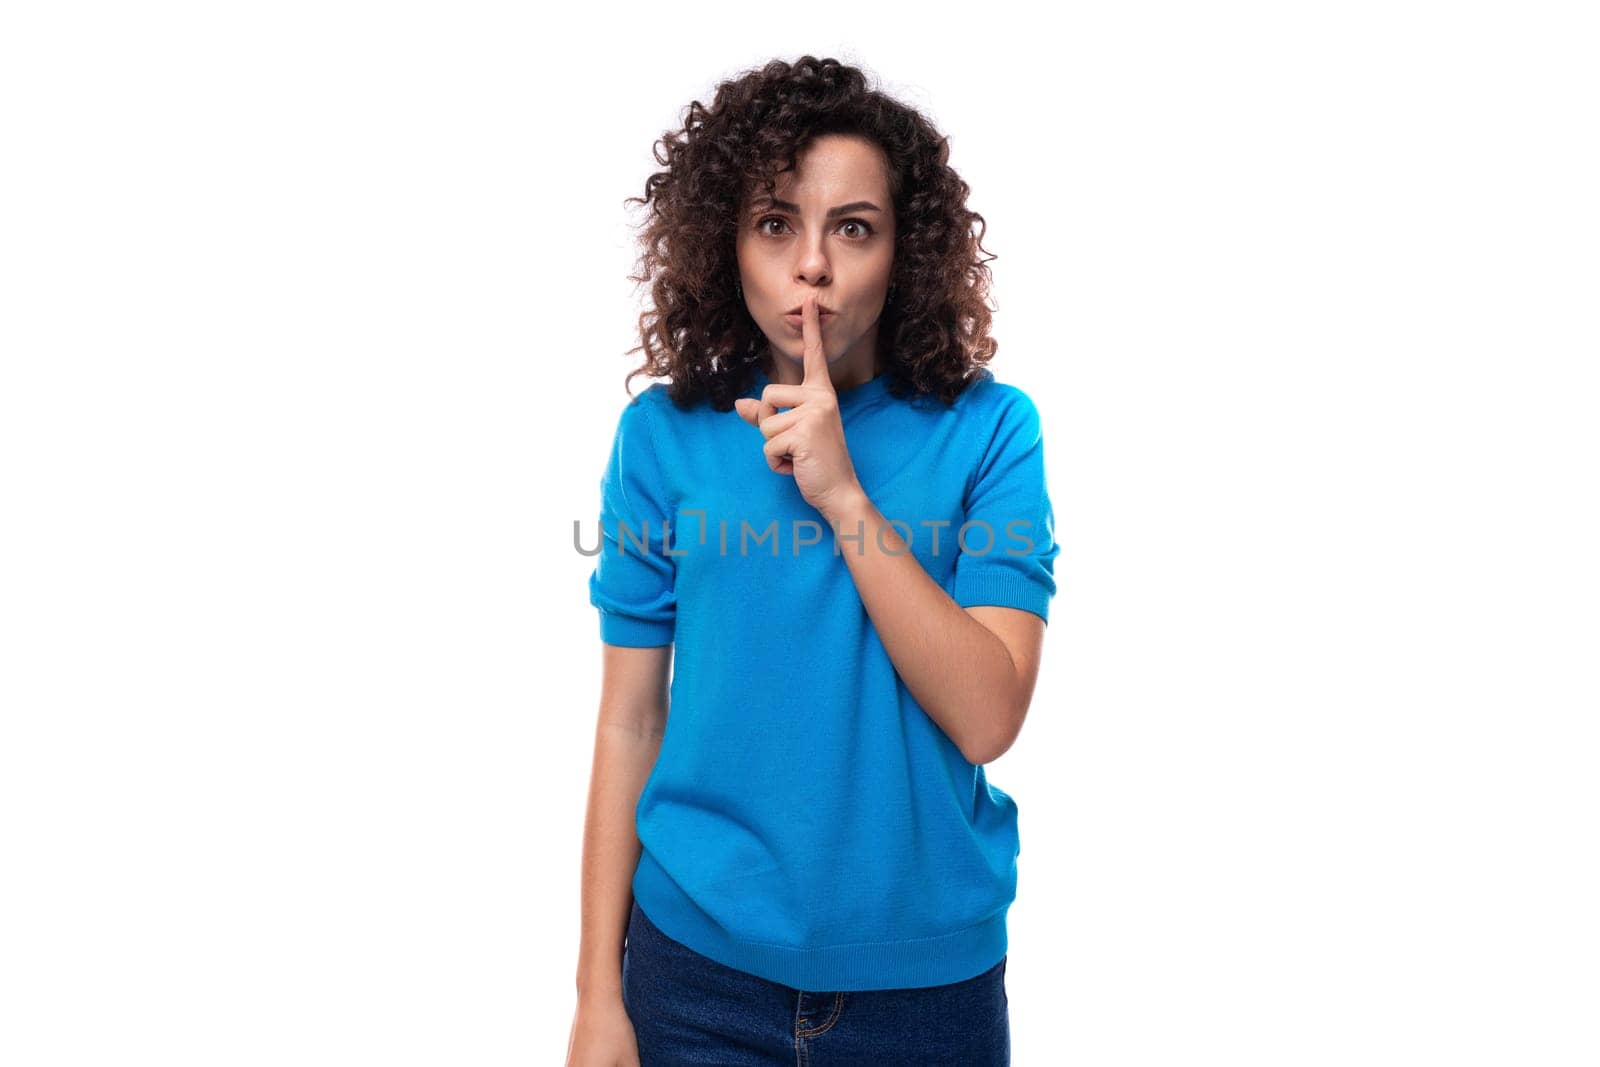 young brunette lady with curly hair dressed in a blue blouse keeps a secret.